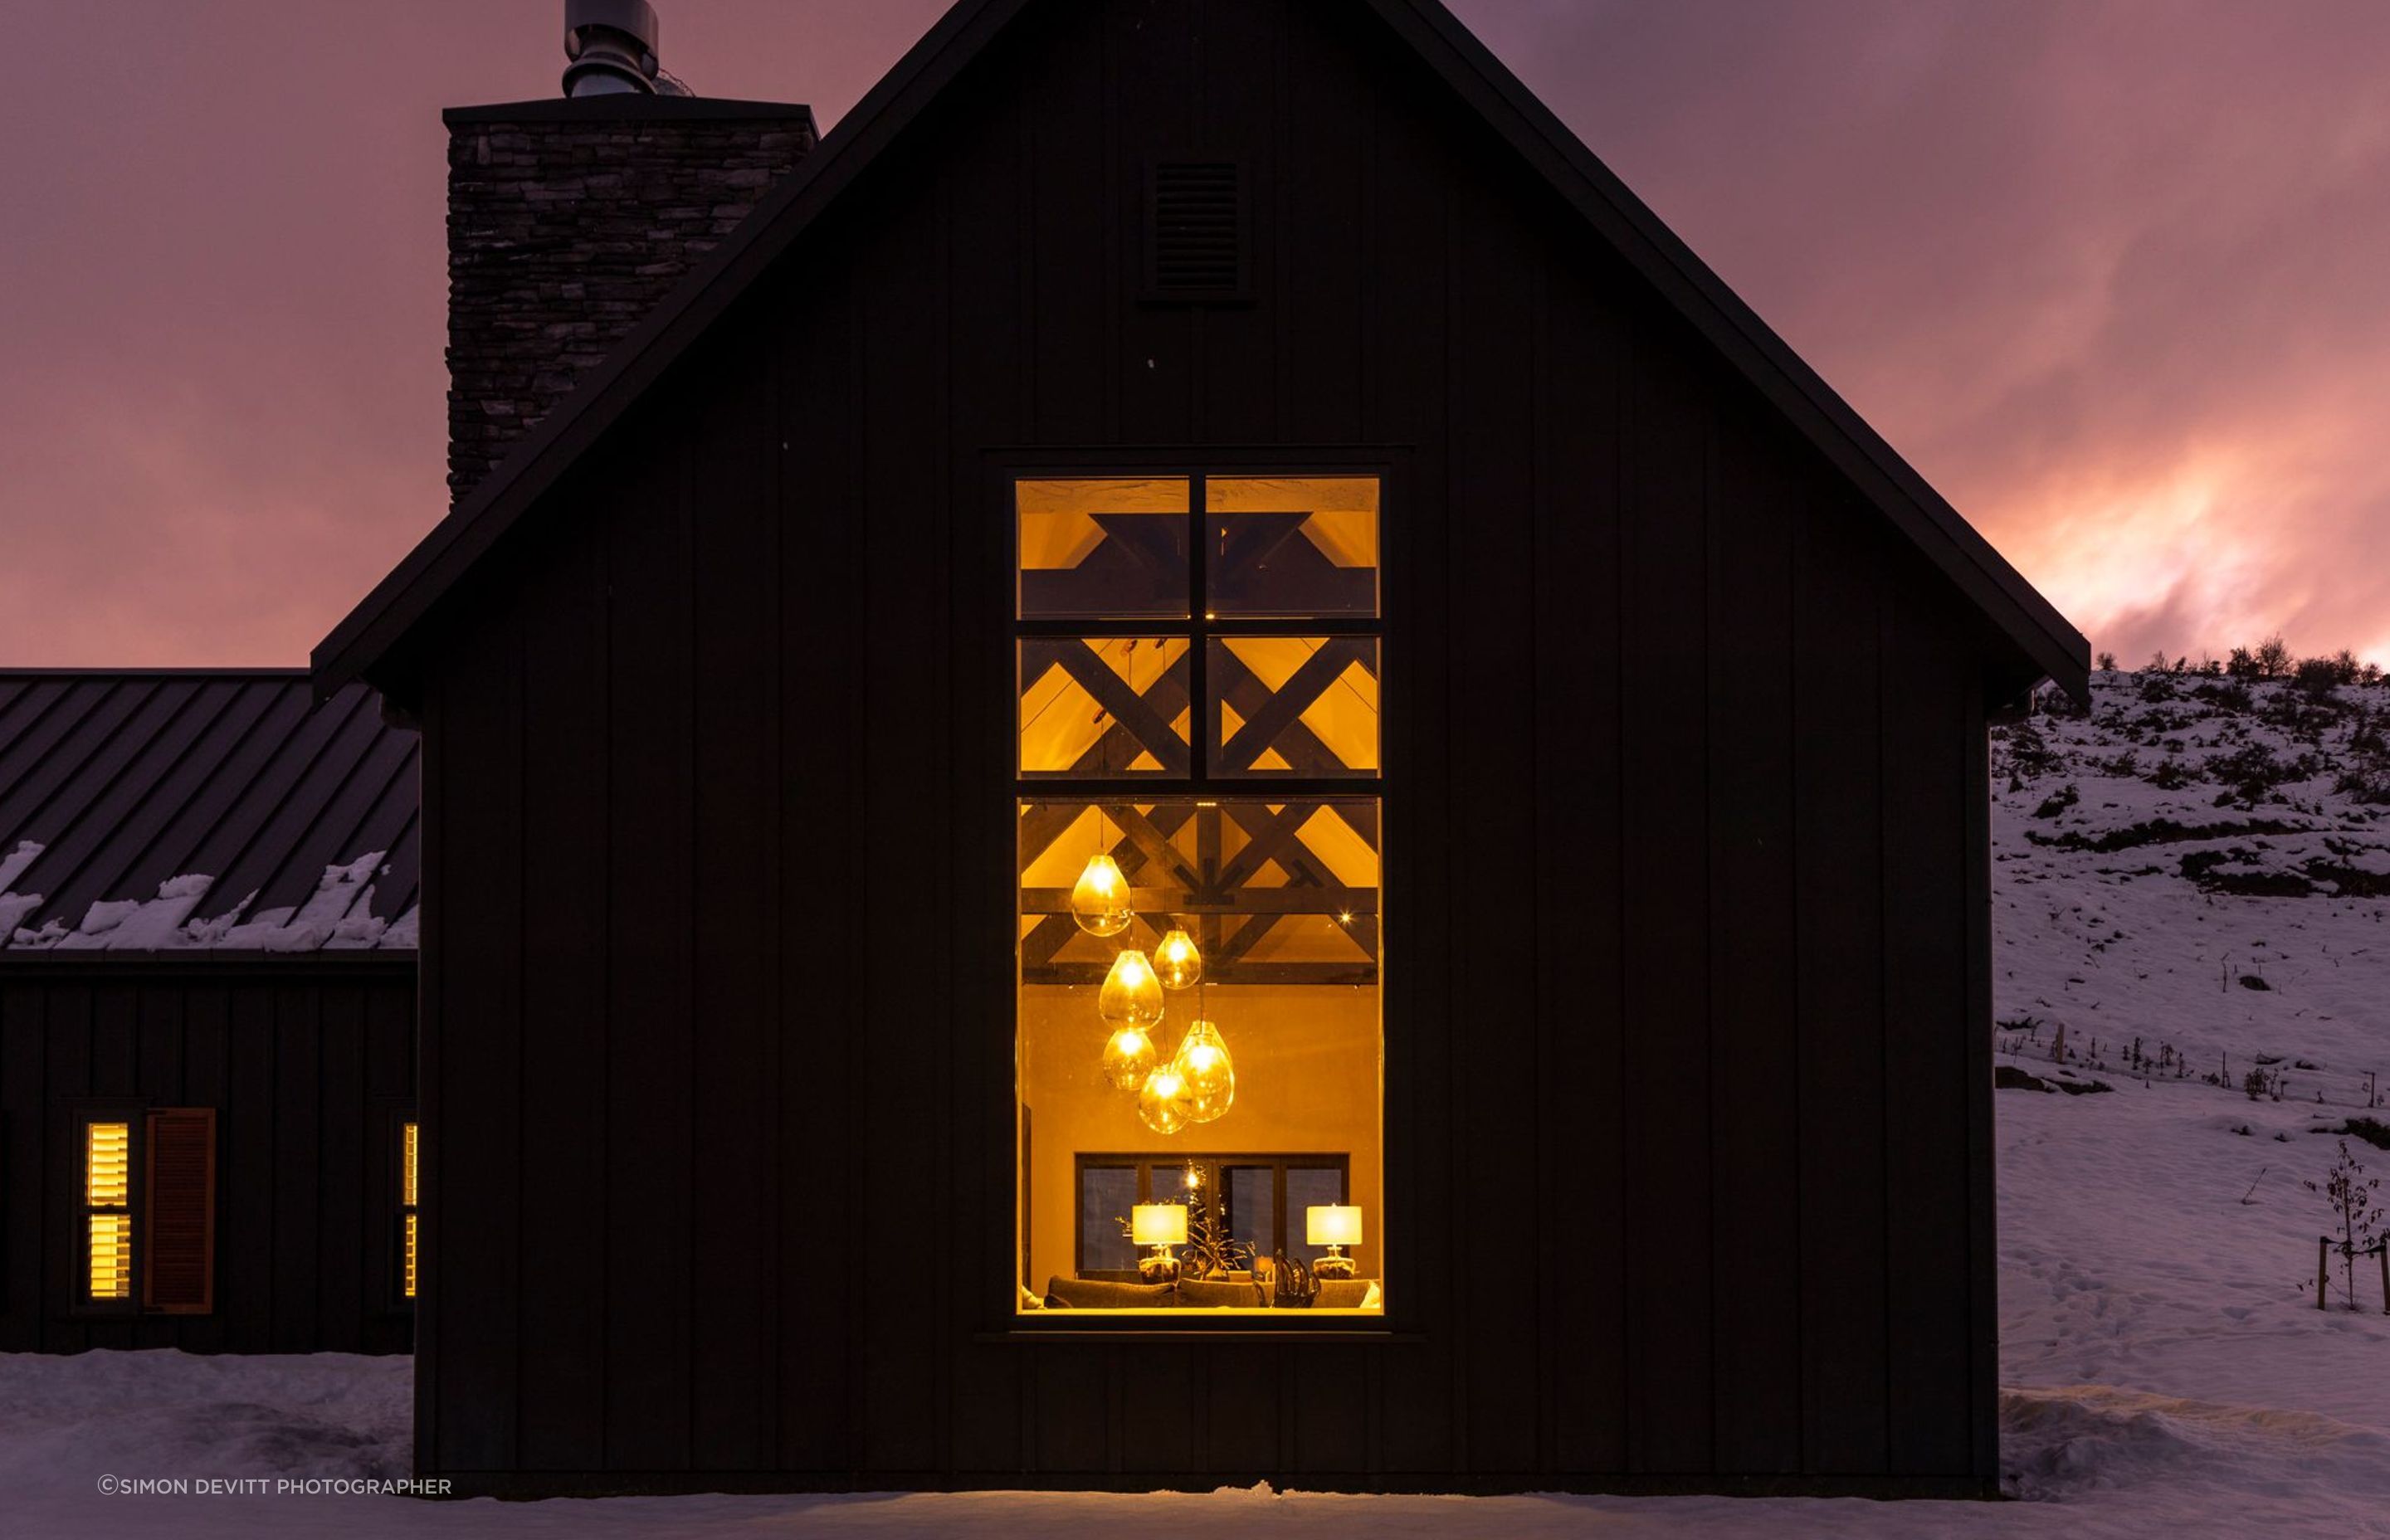 “At night, when you look from the road, the house glows through that big window, it is quite beautiful.”